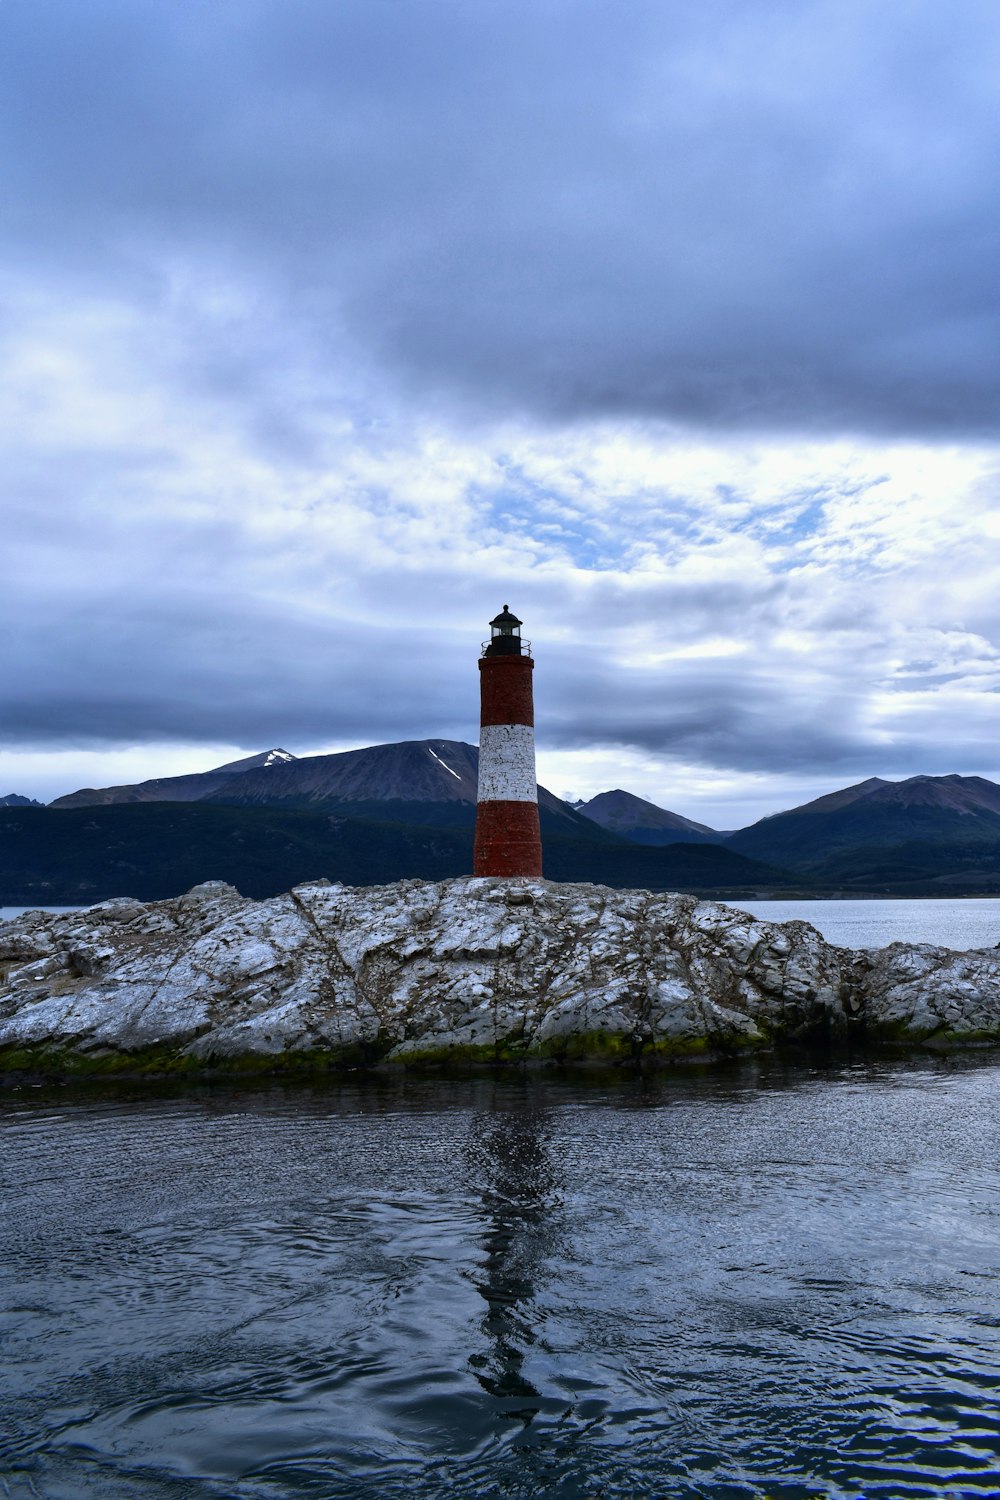 white and red lighthouse on gray rocky mountain under gray cloudy sky during daytime